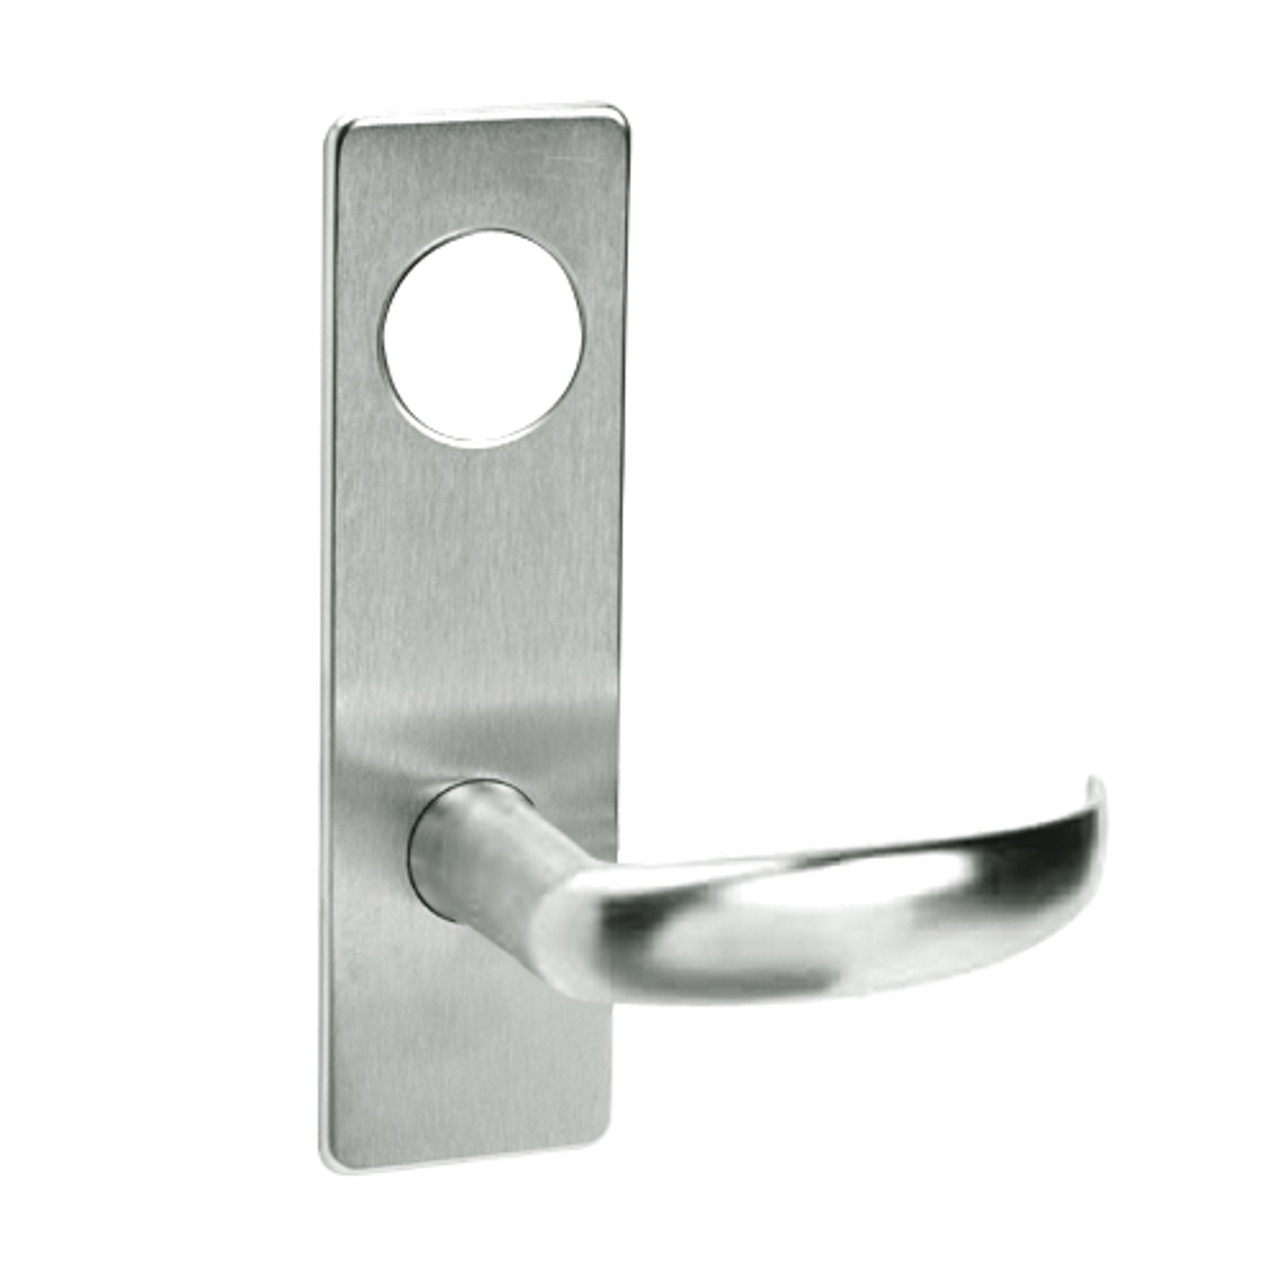 ML2058-PSM-618-LC Corbin Russwin ML2000 Series Mortise Entrance Holdback Locksets with Princeton Lever in Bright Nickel